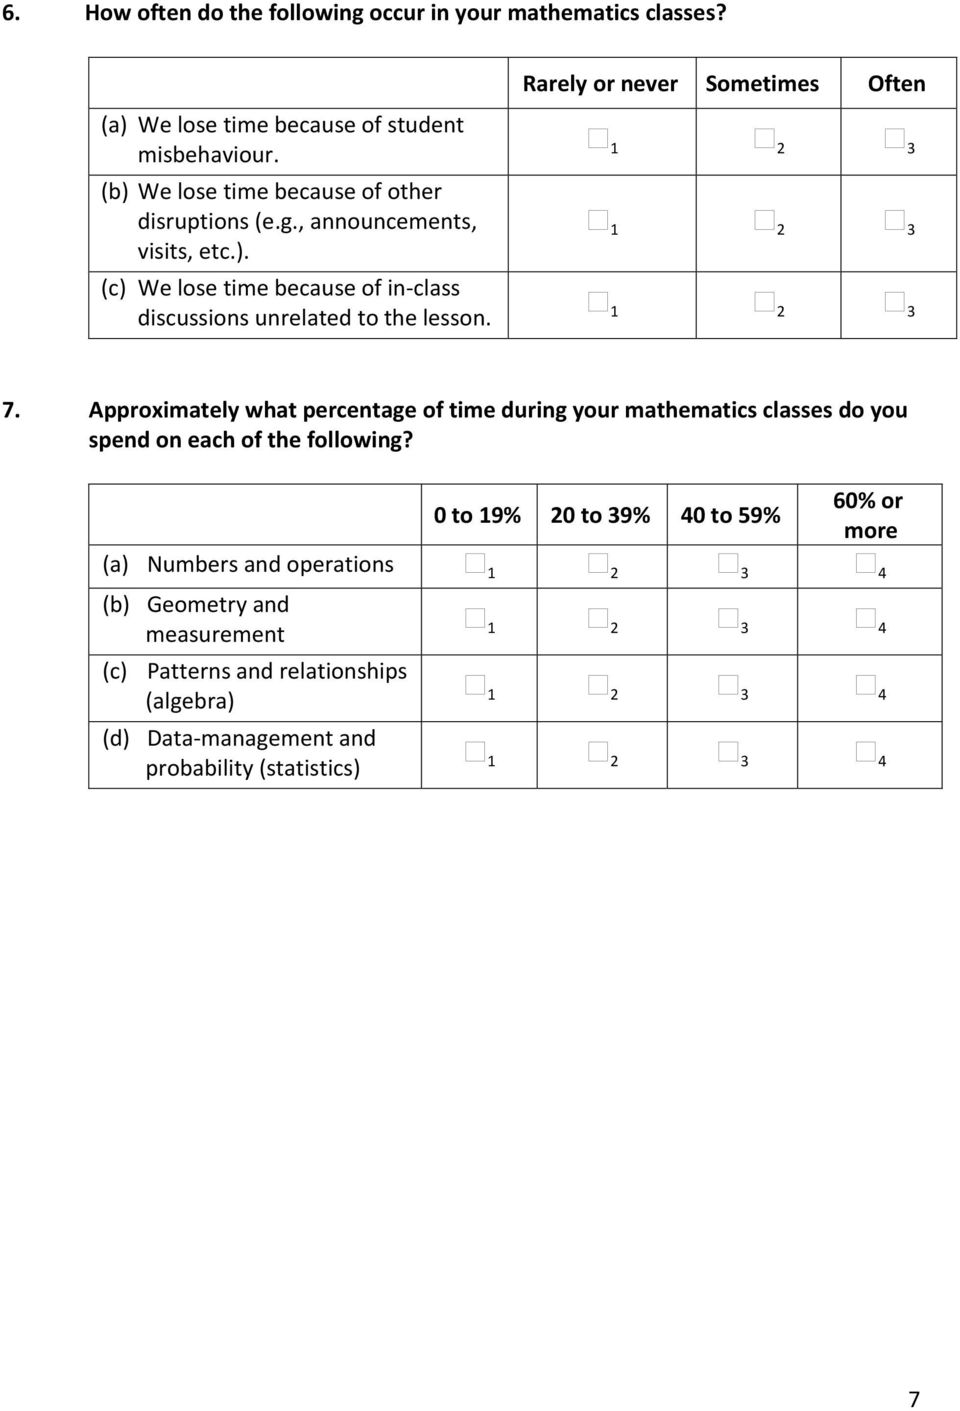 7. Approximately what percentage of time during your mathematics classes do you spend on each of the following?